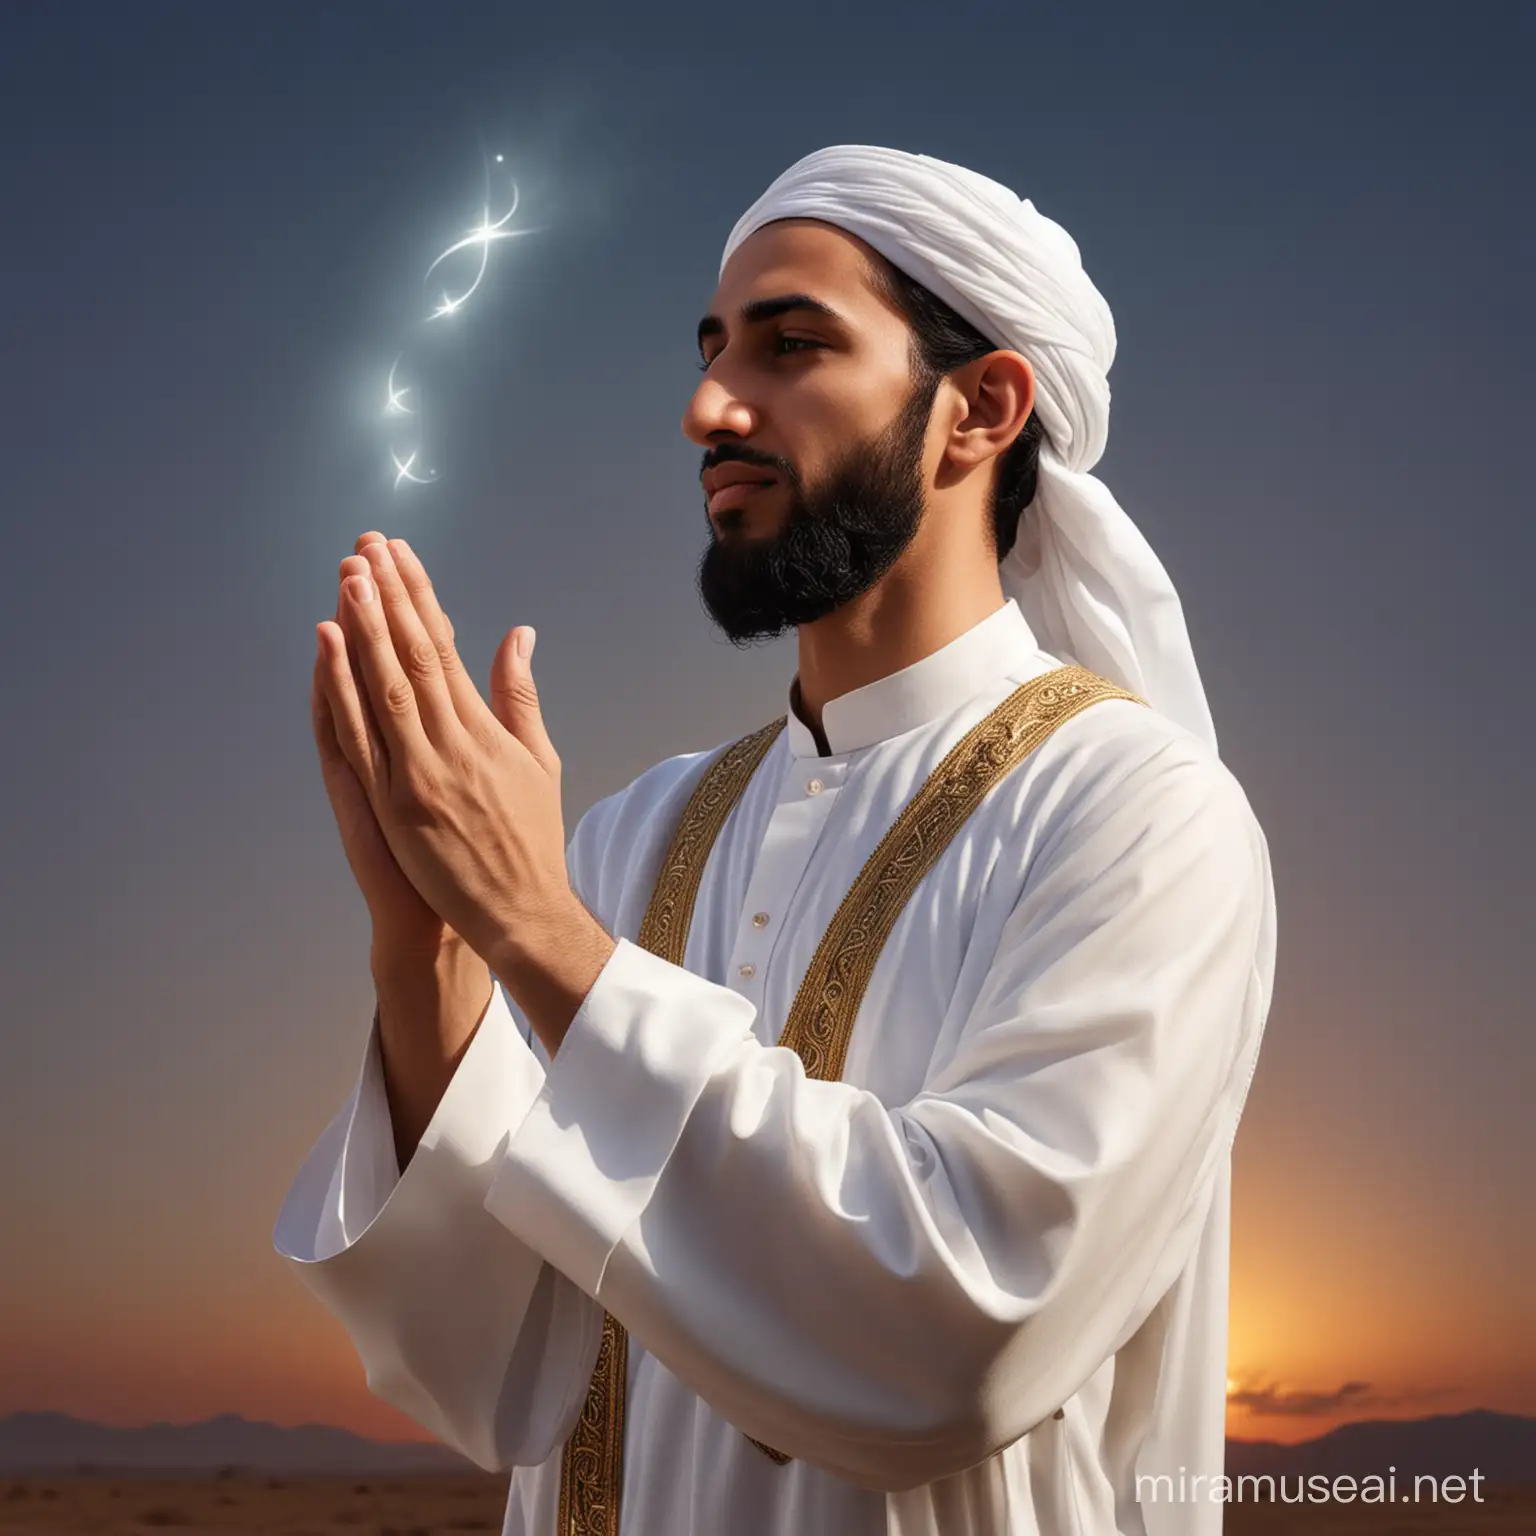 Generate an image of the Prophet Muhammad (peace be upon him) offering supplication (dua) with his hands raised towards the sky, conveying a sense of humility and devotion.